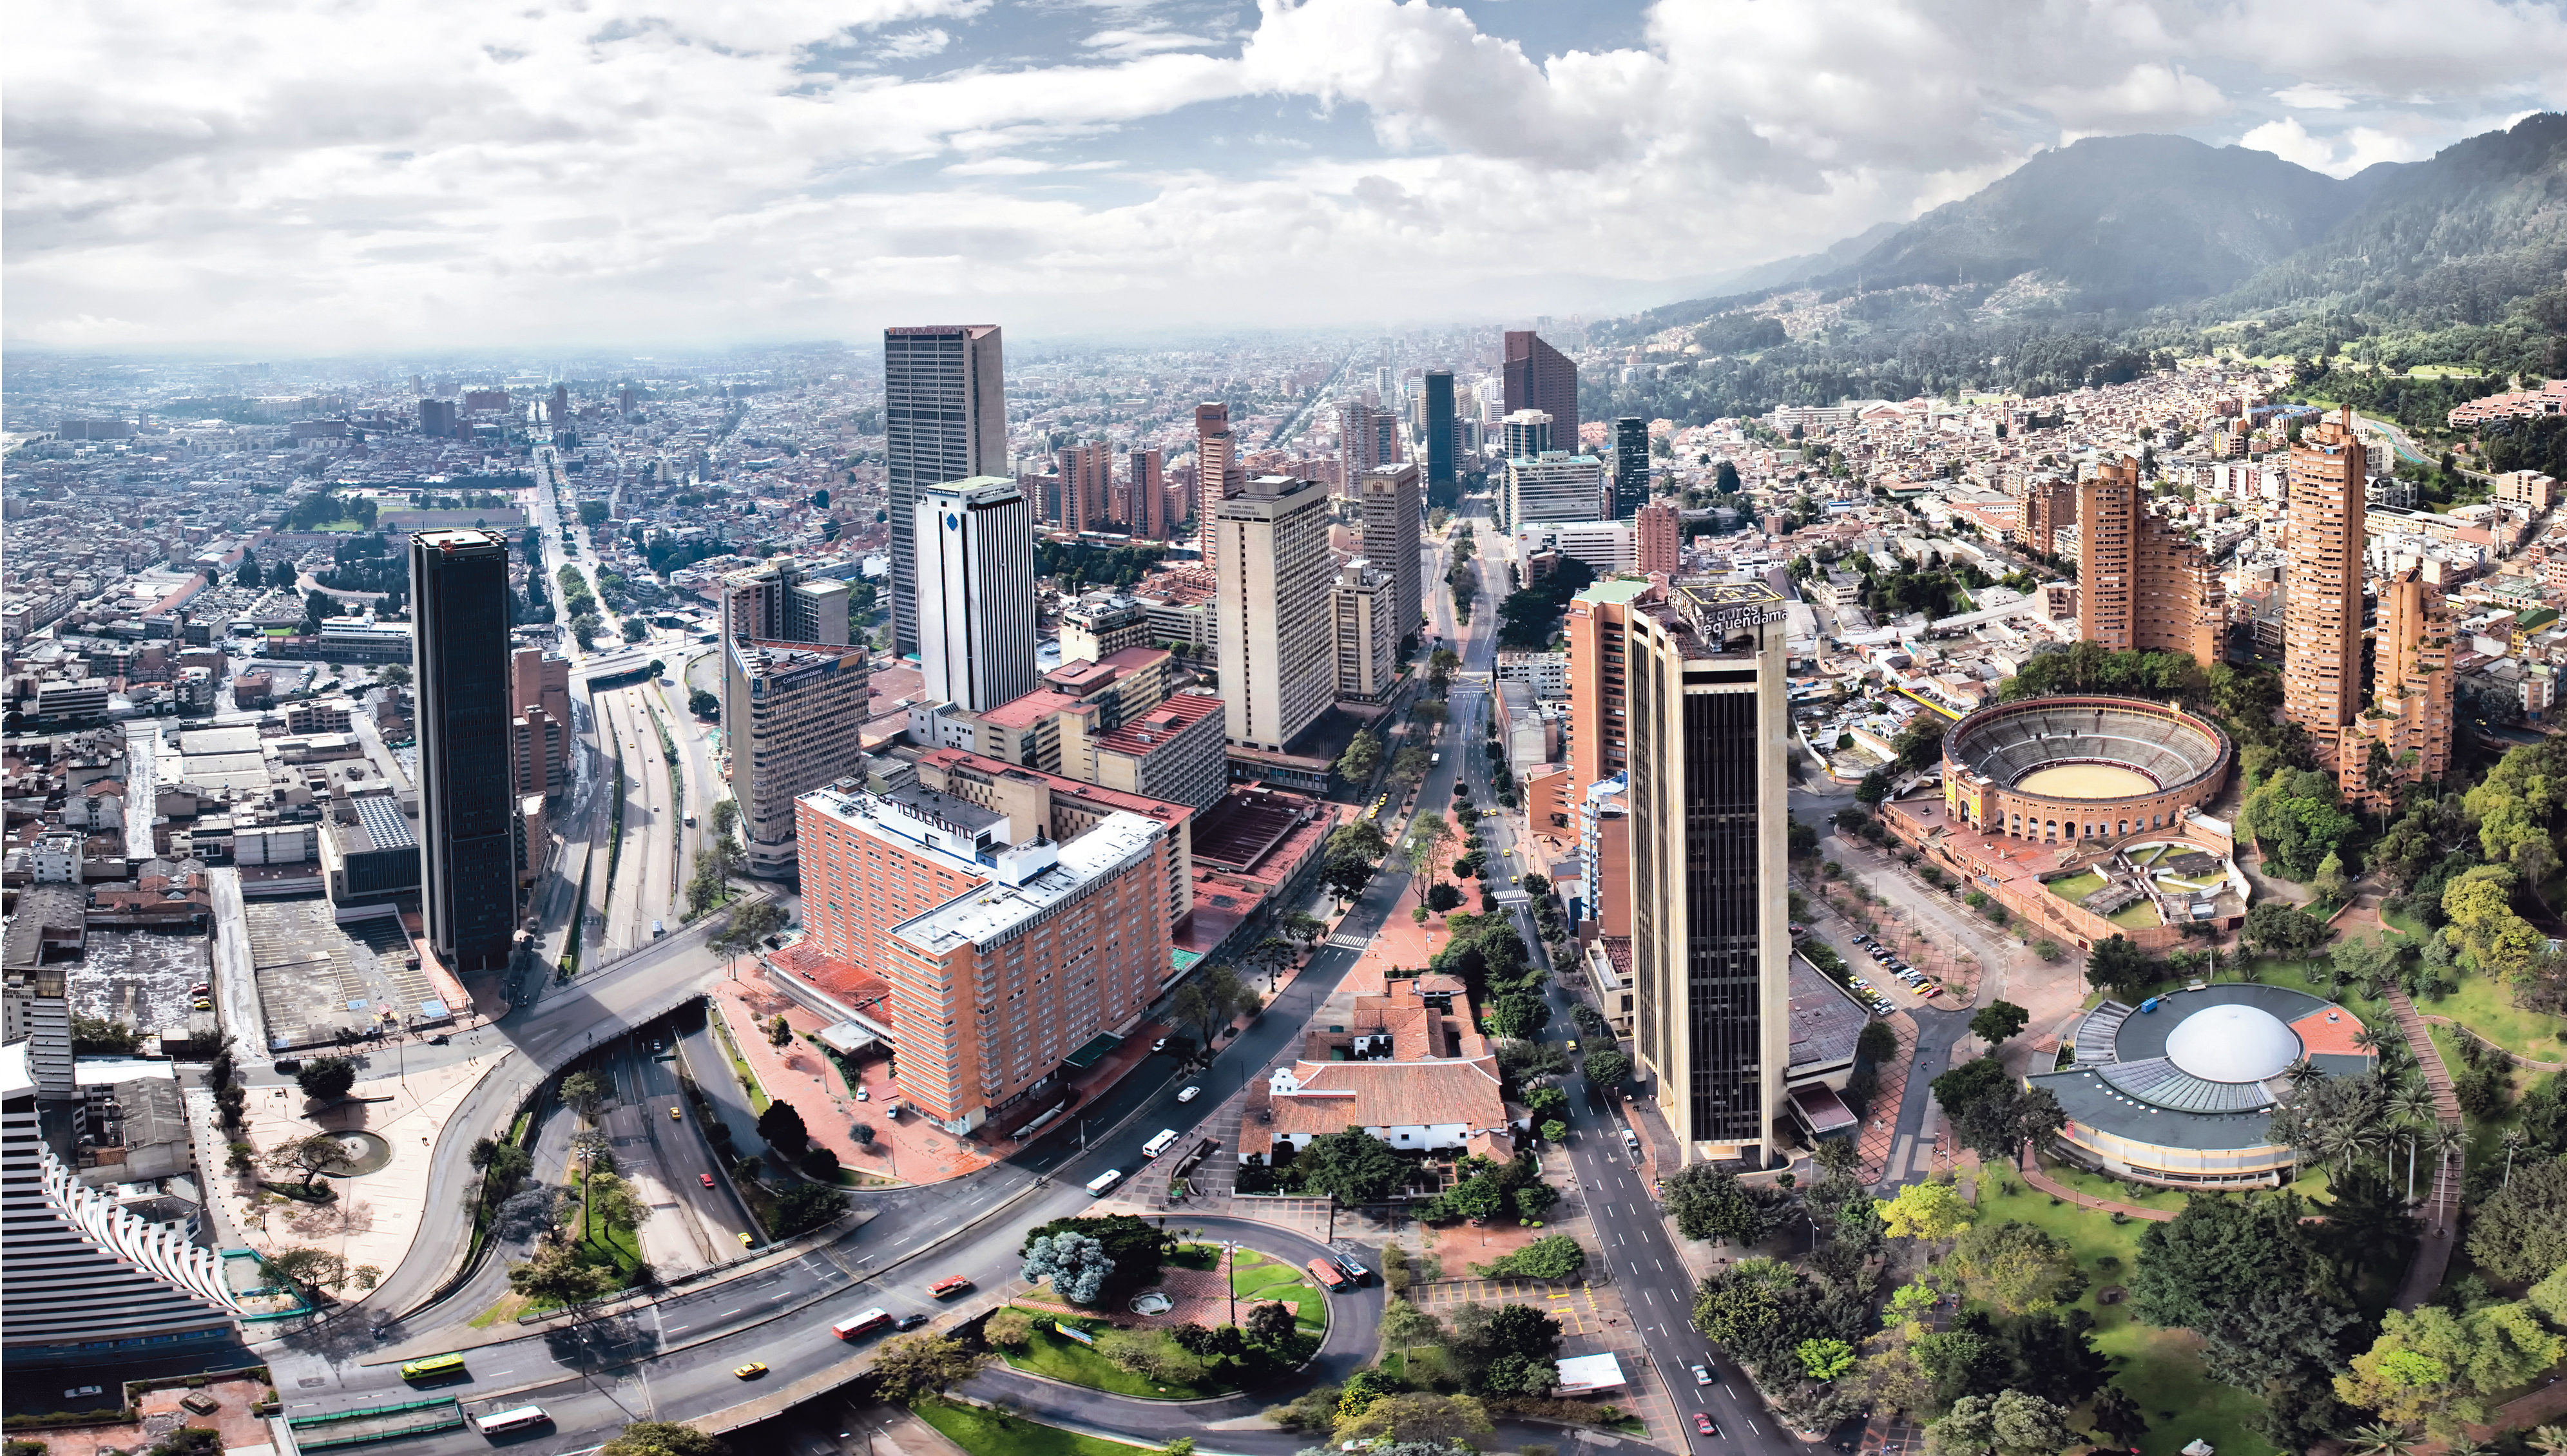 Delta Air Lines City Office in Bogota, Colombia - Airlines-Airports